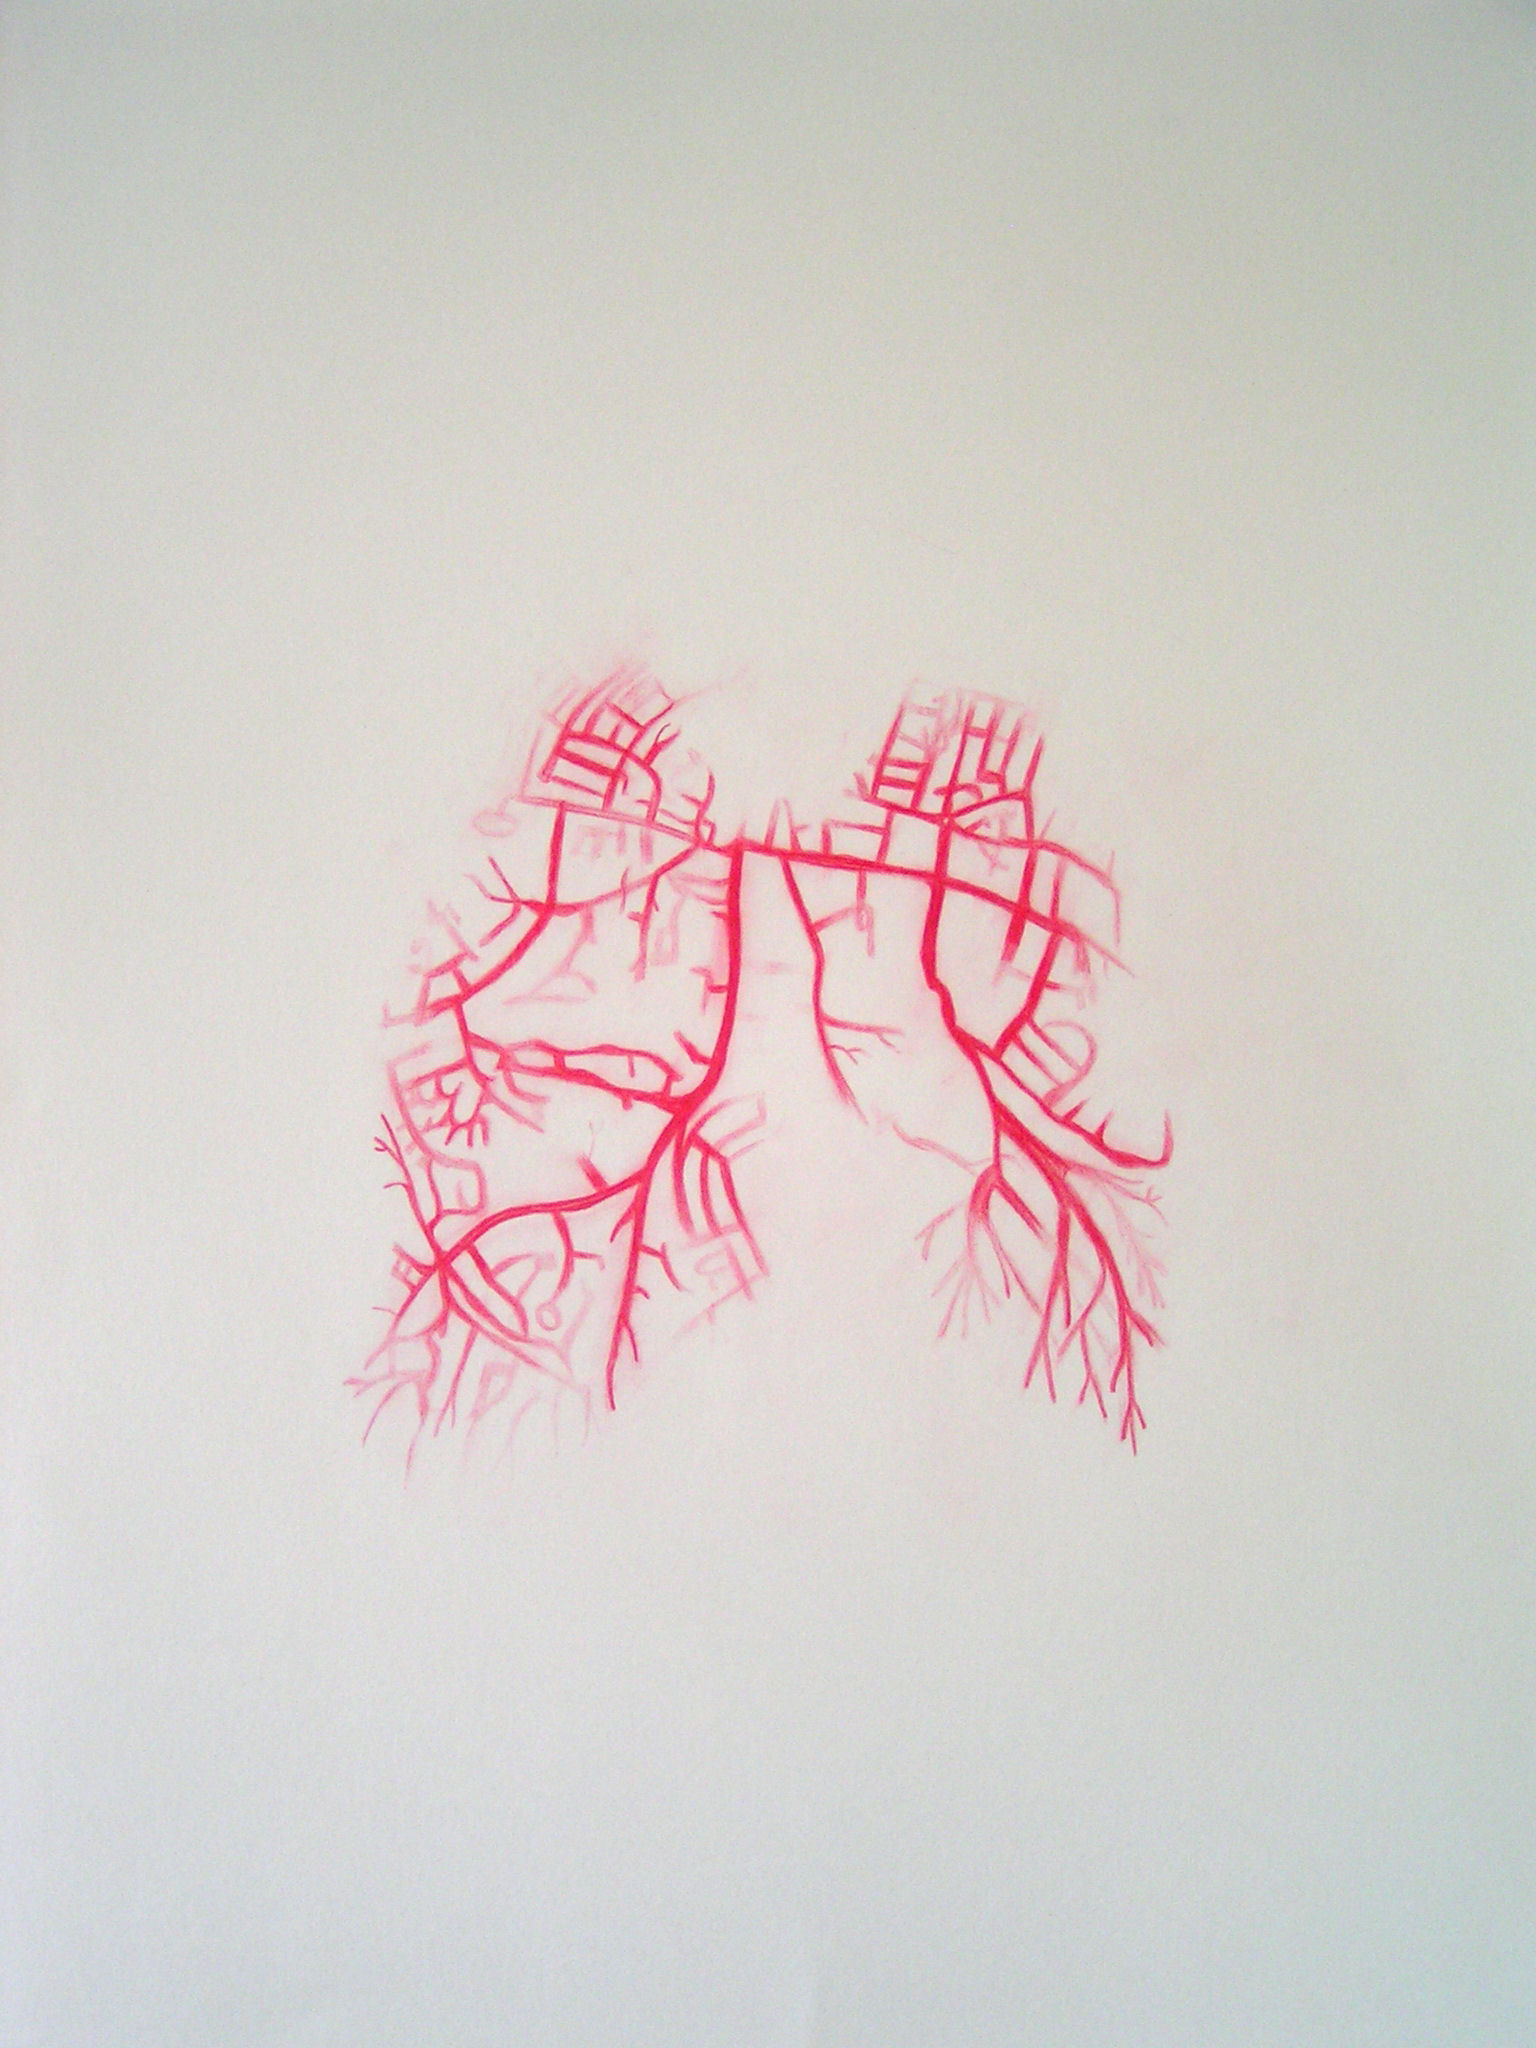 Emma J Williams 'Untitled Red Drawing No.5' 2008 pencil on paper